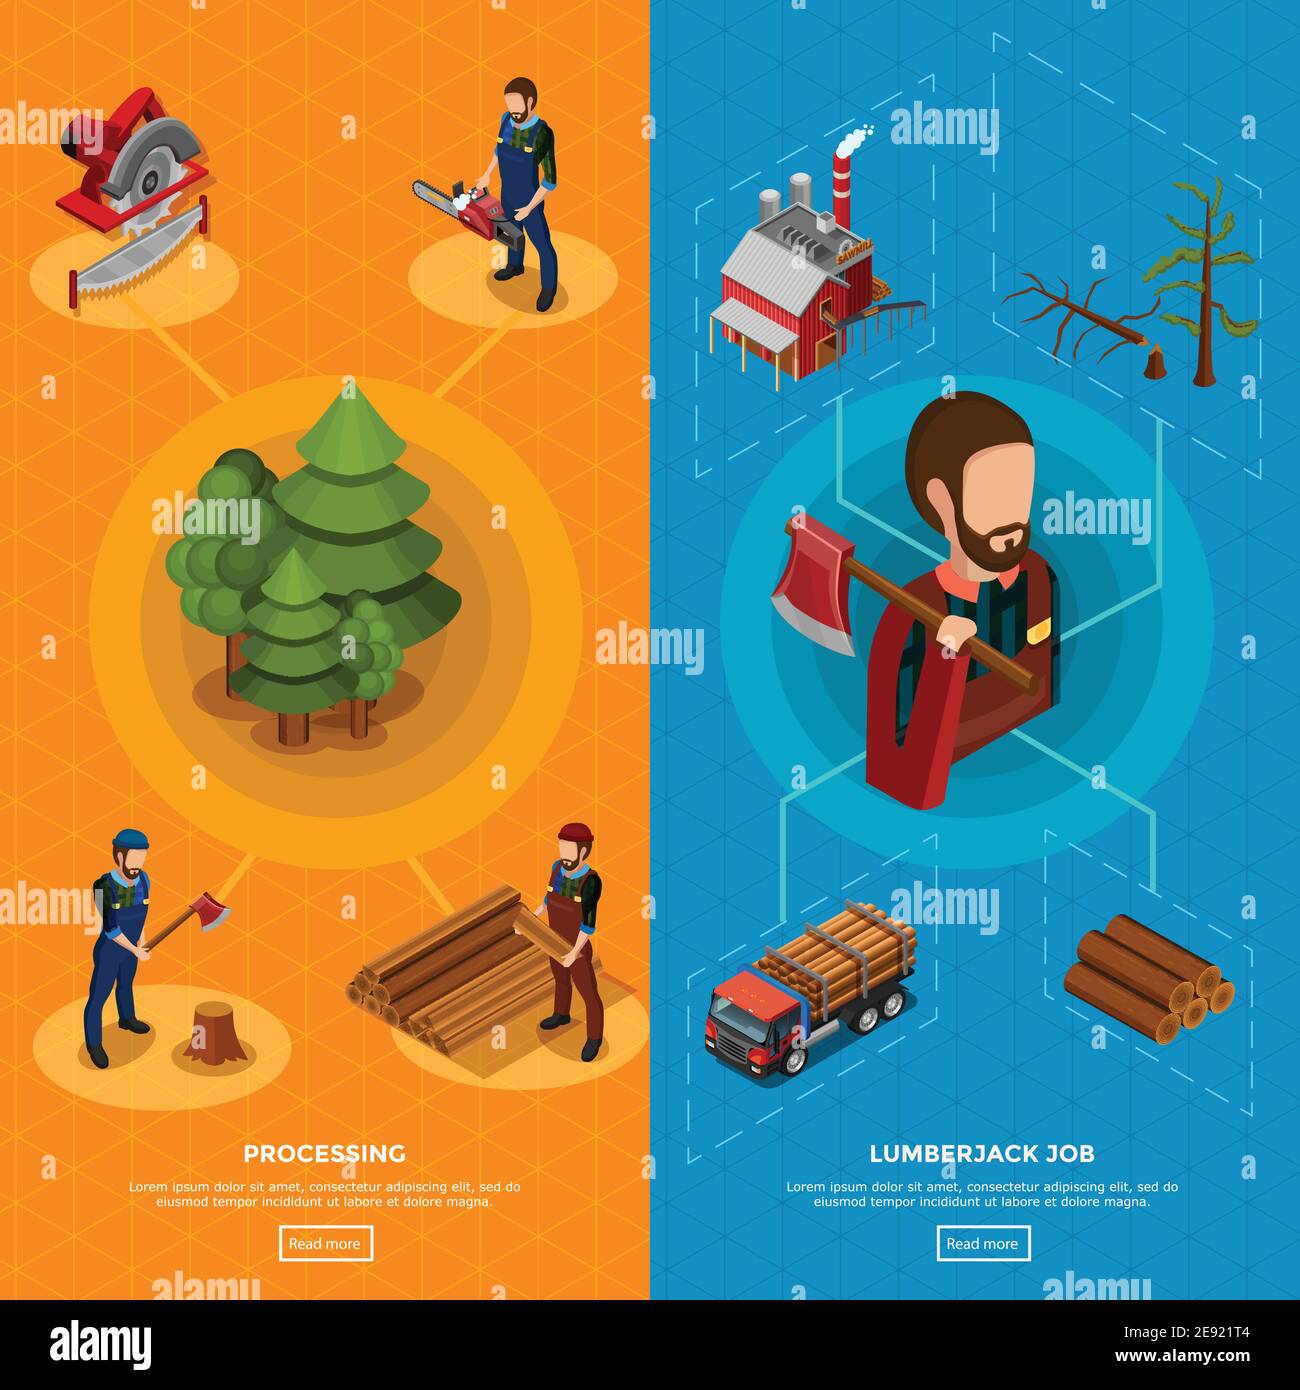 Lumberjack job isometric vertical banners with set of icons showing woodworking process and equipment for felling flat vector illustration Stock Vector